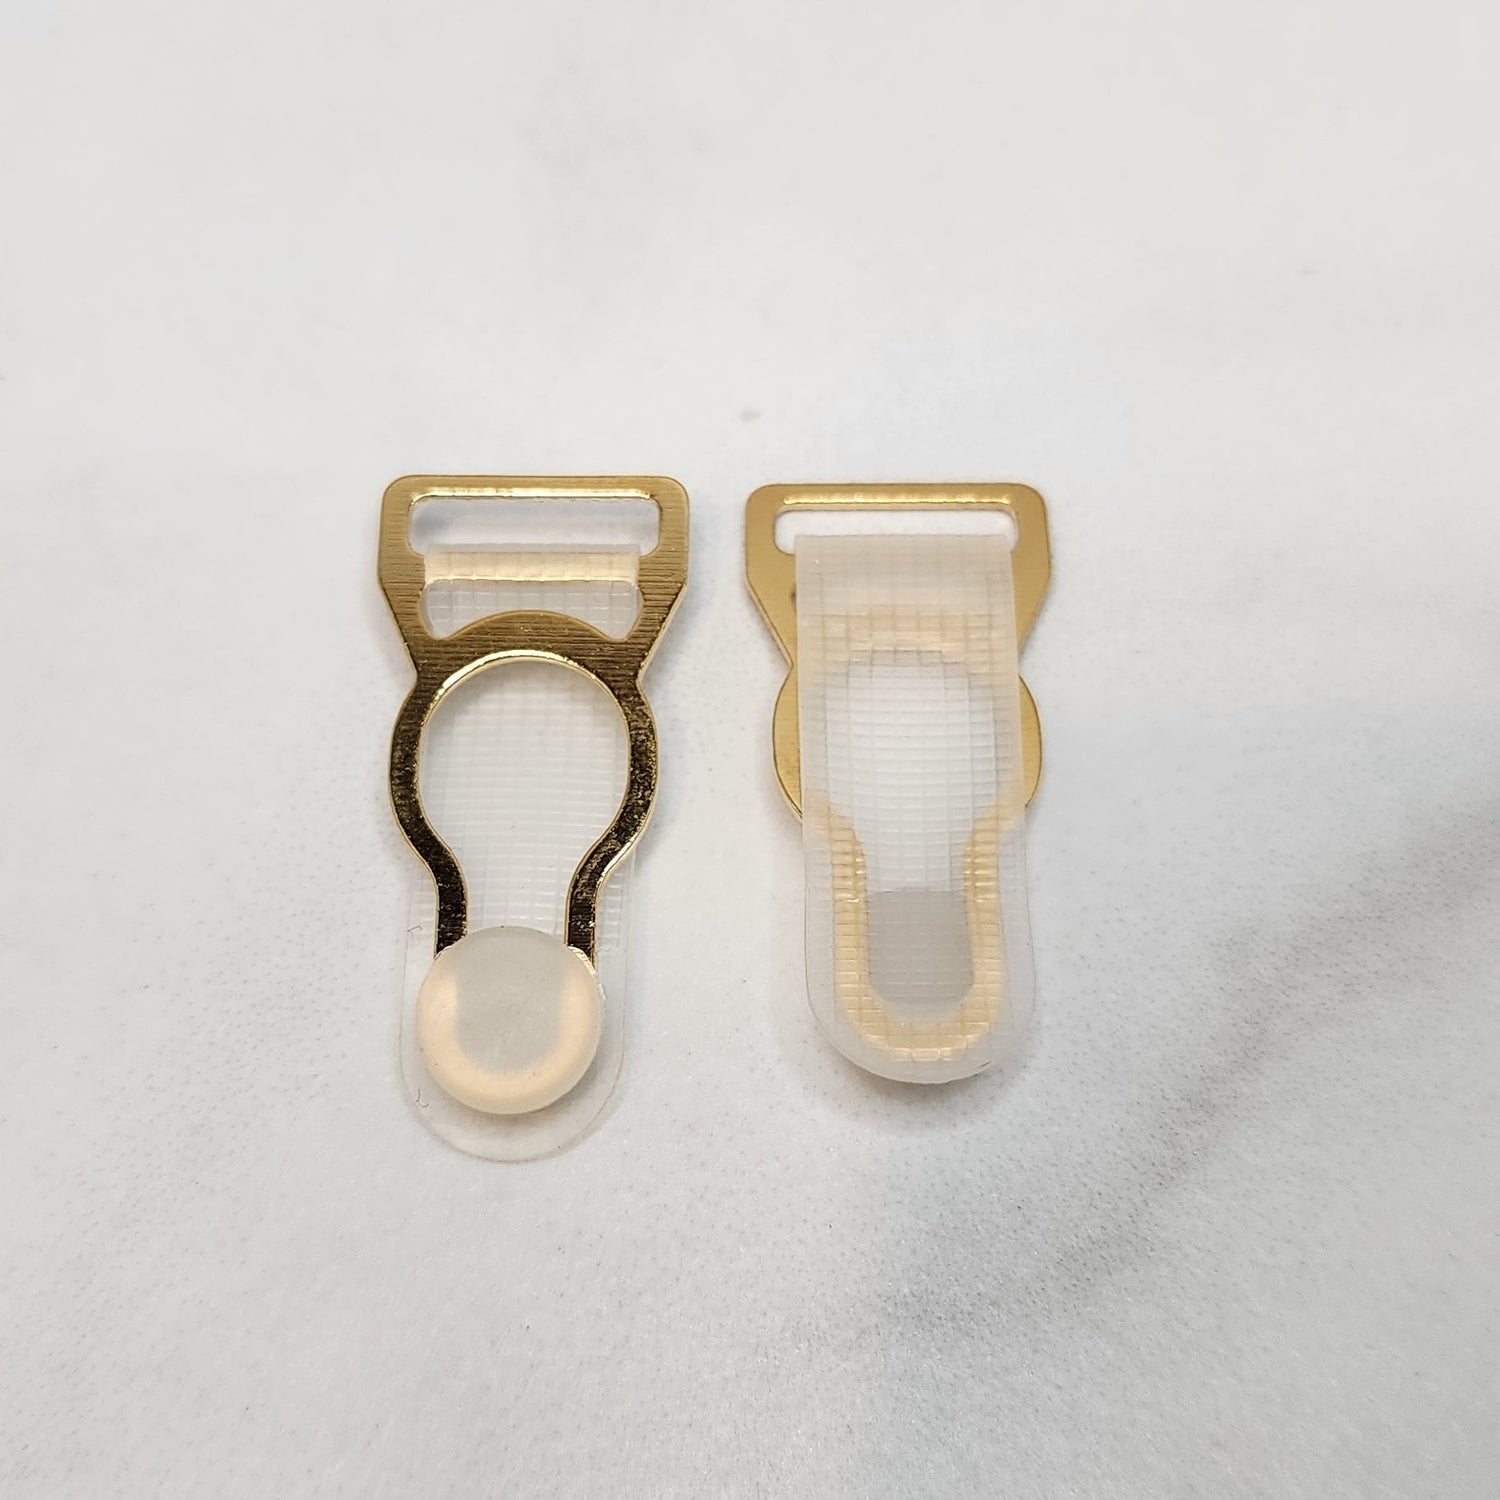 12mm Garter Clip 24k Gold Plated (49612) Nickel Free - Allied Trimmings Inc